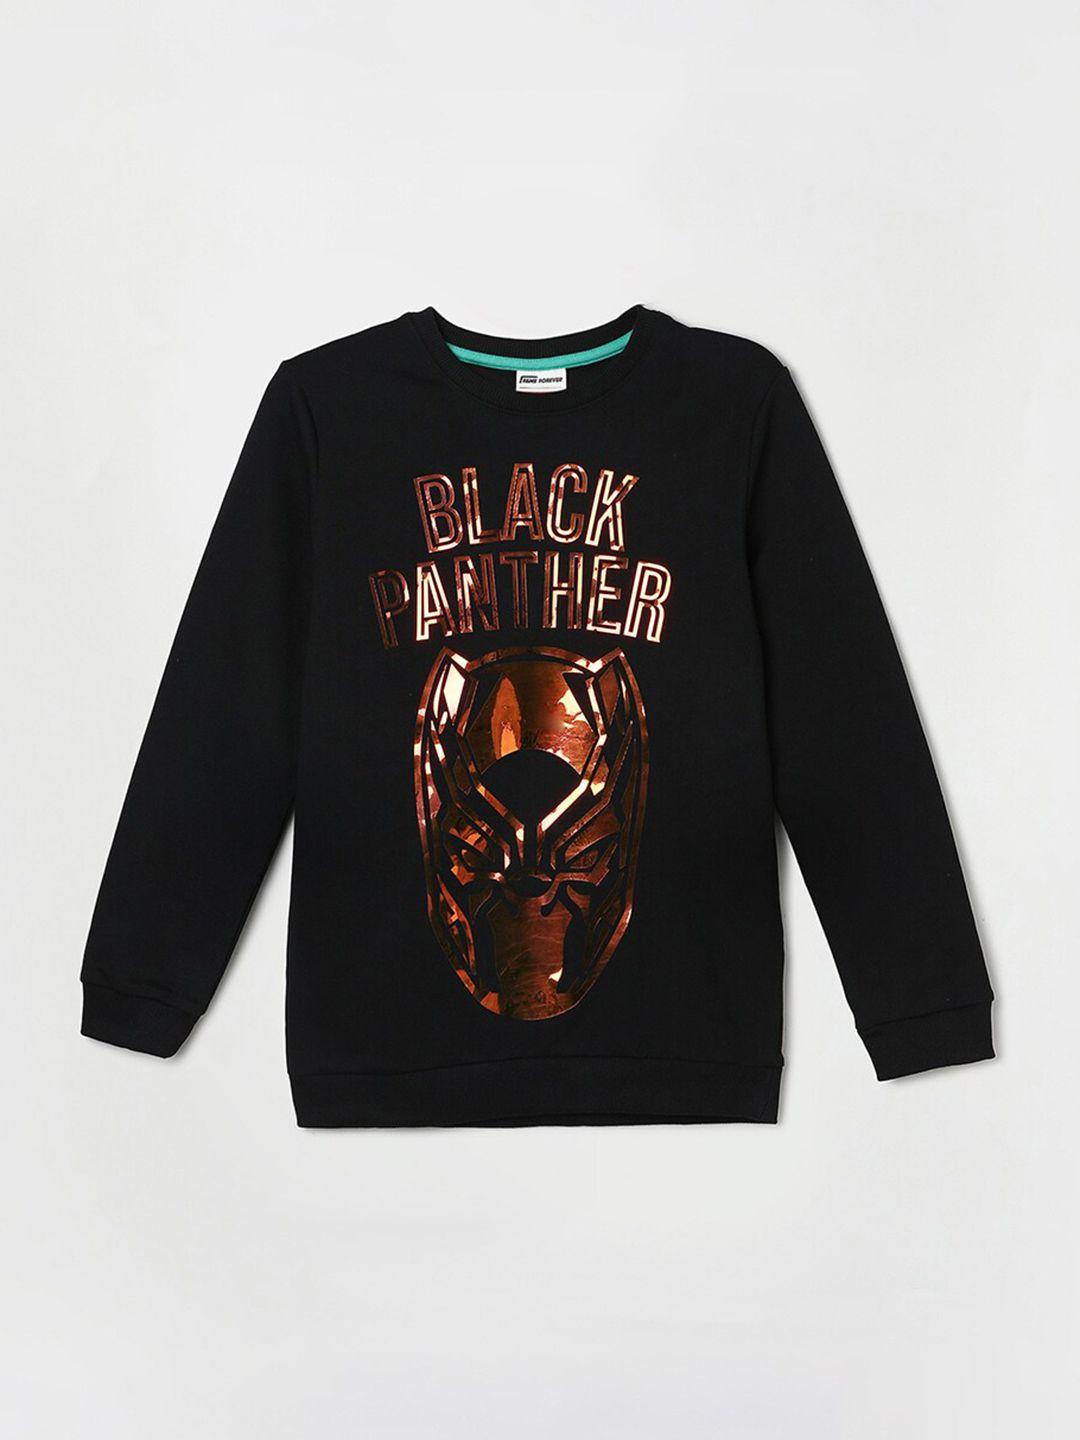 fame forever by lifestyle boys black panther printed long sleeves pure cotton pullover